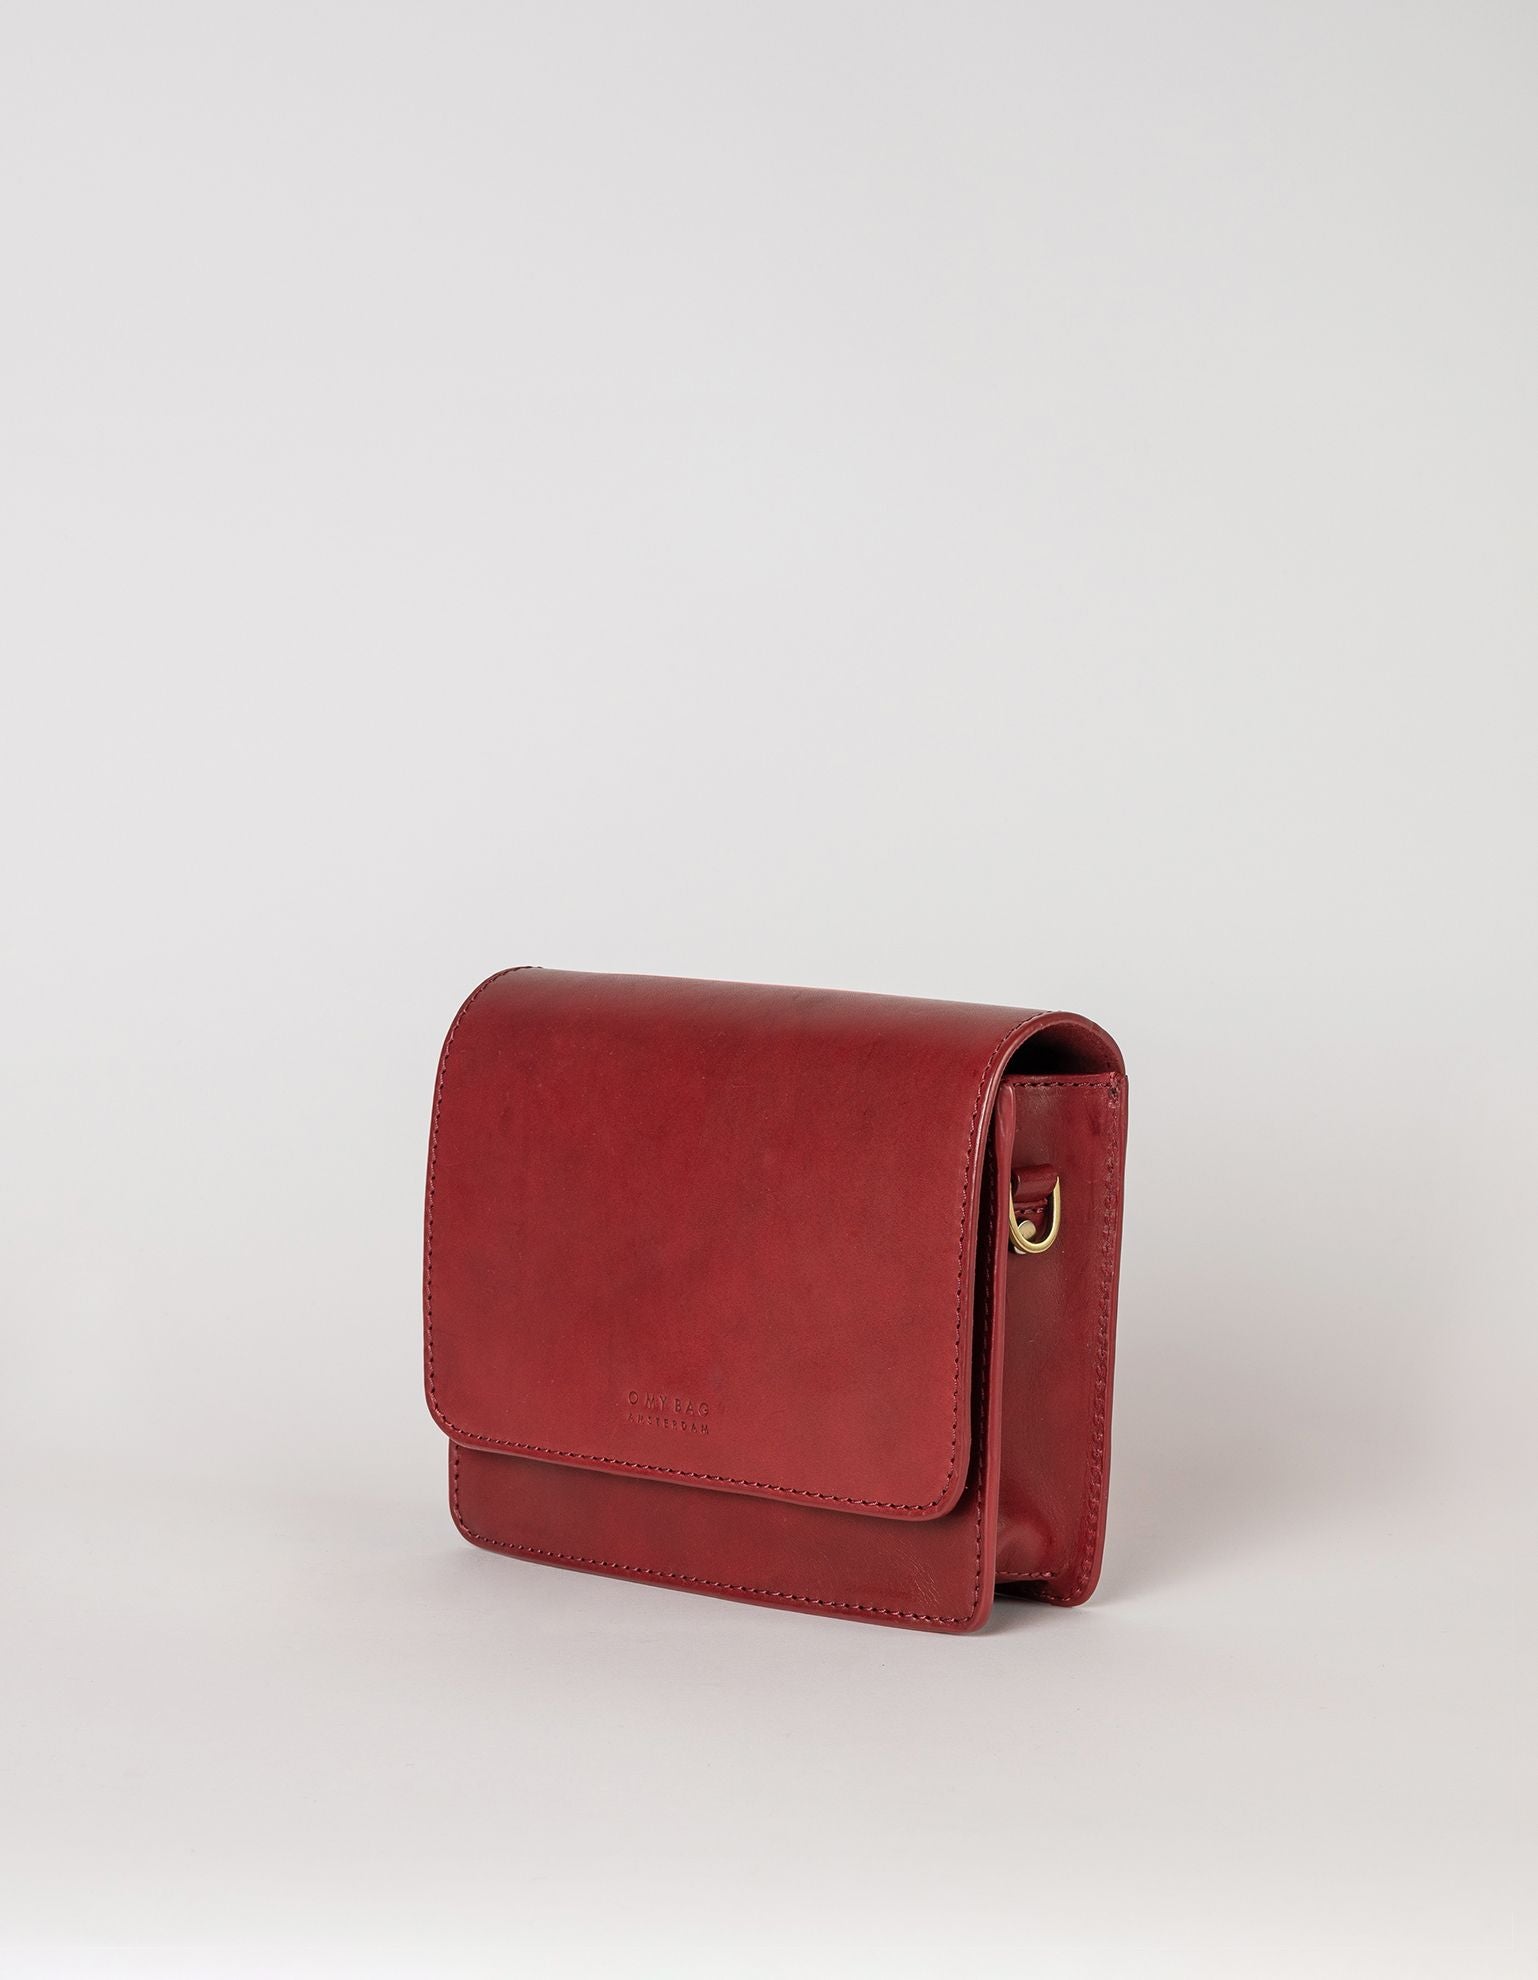 Audrey mini ruby classic leather - side product image